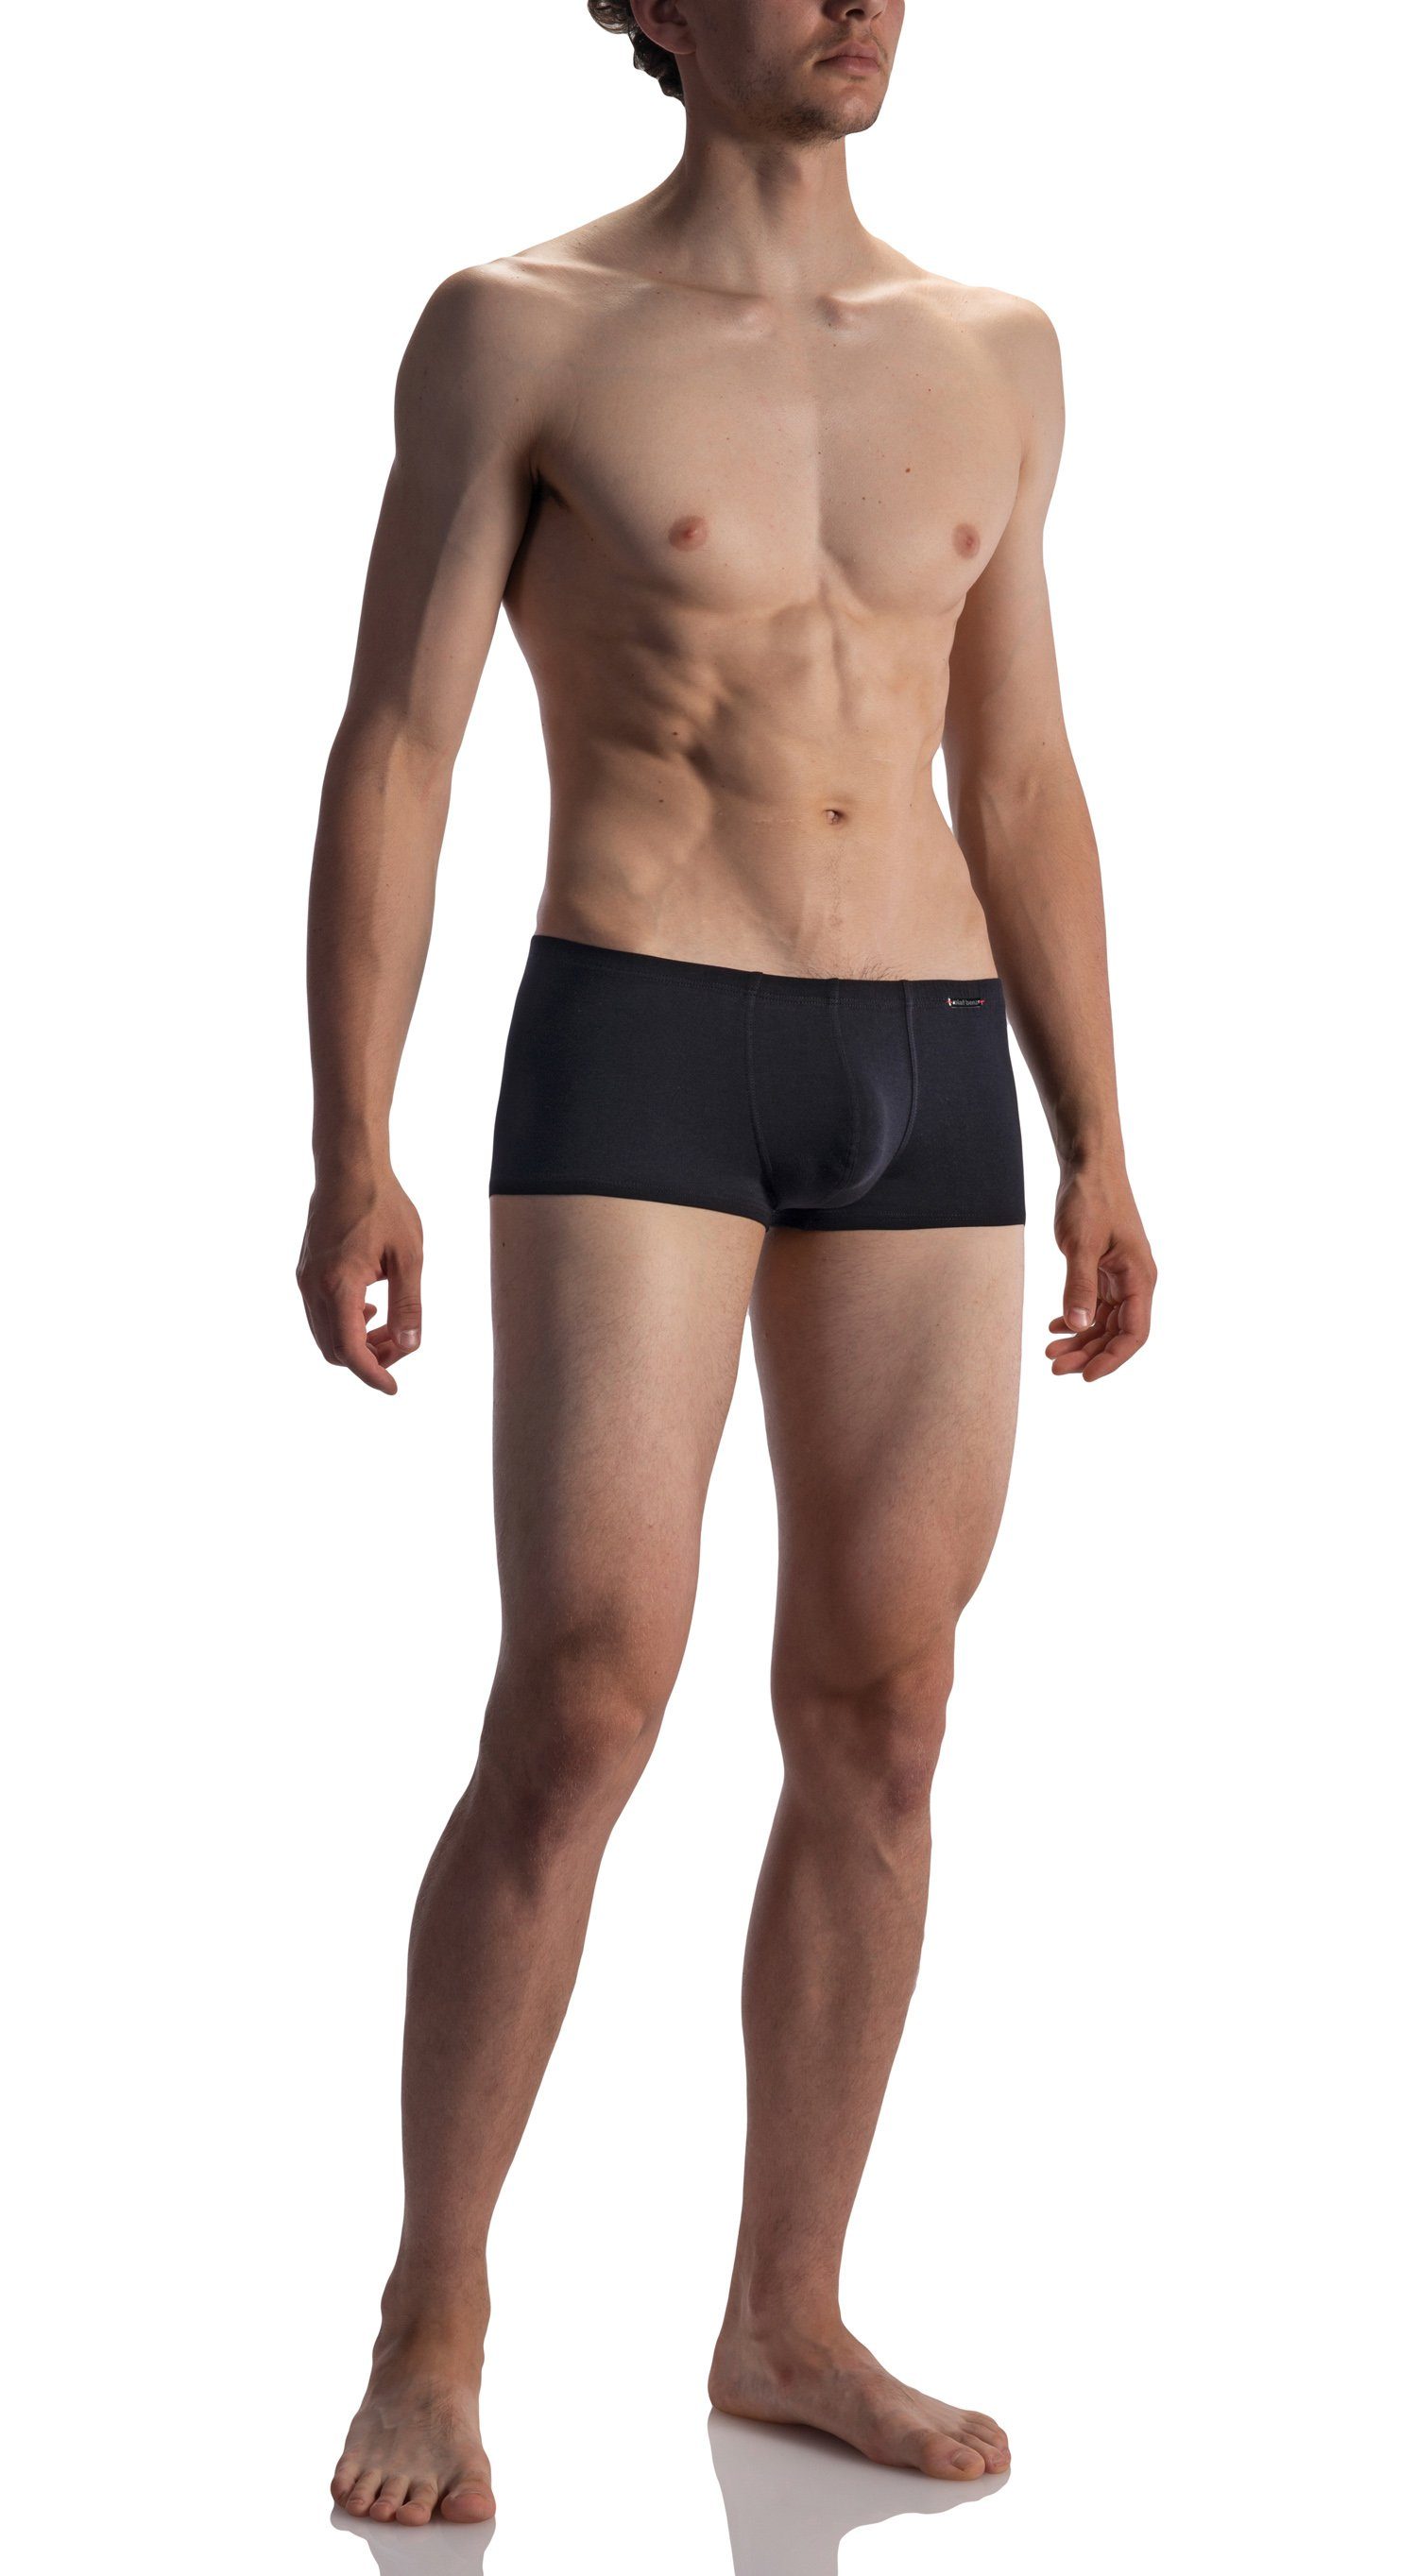 Benz Olaf Benz Boxershorts (Packung, 1601 Schwarz 2er-Pack) Olaf Minipants Doppelpack RED